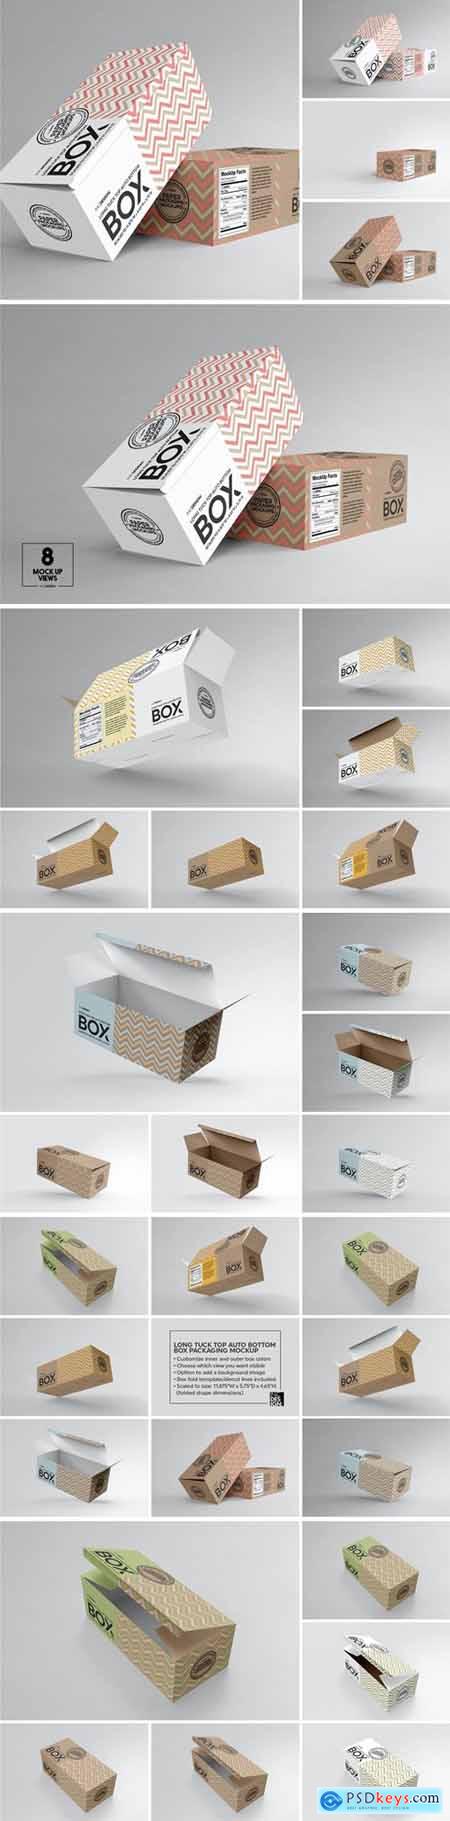 Download Paper Box Carrier Tray Packaging Mockup Free Download Photoshop Vector Stock Image Via Torrent Zippyshare From Psdkeys Com